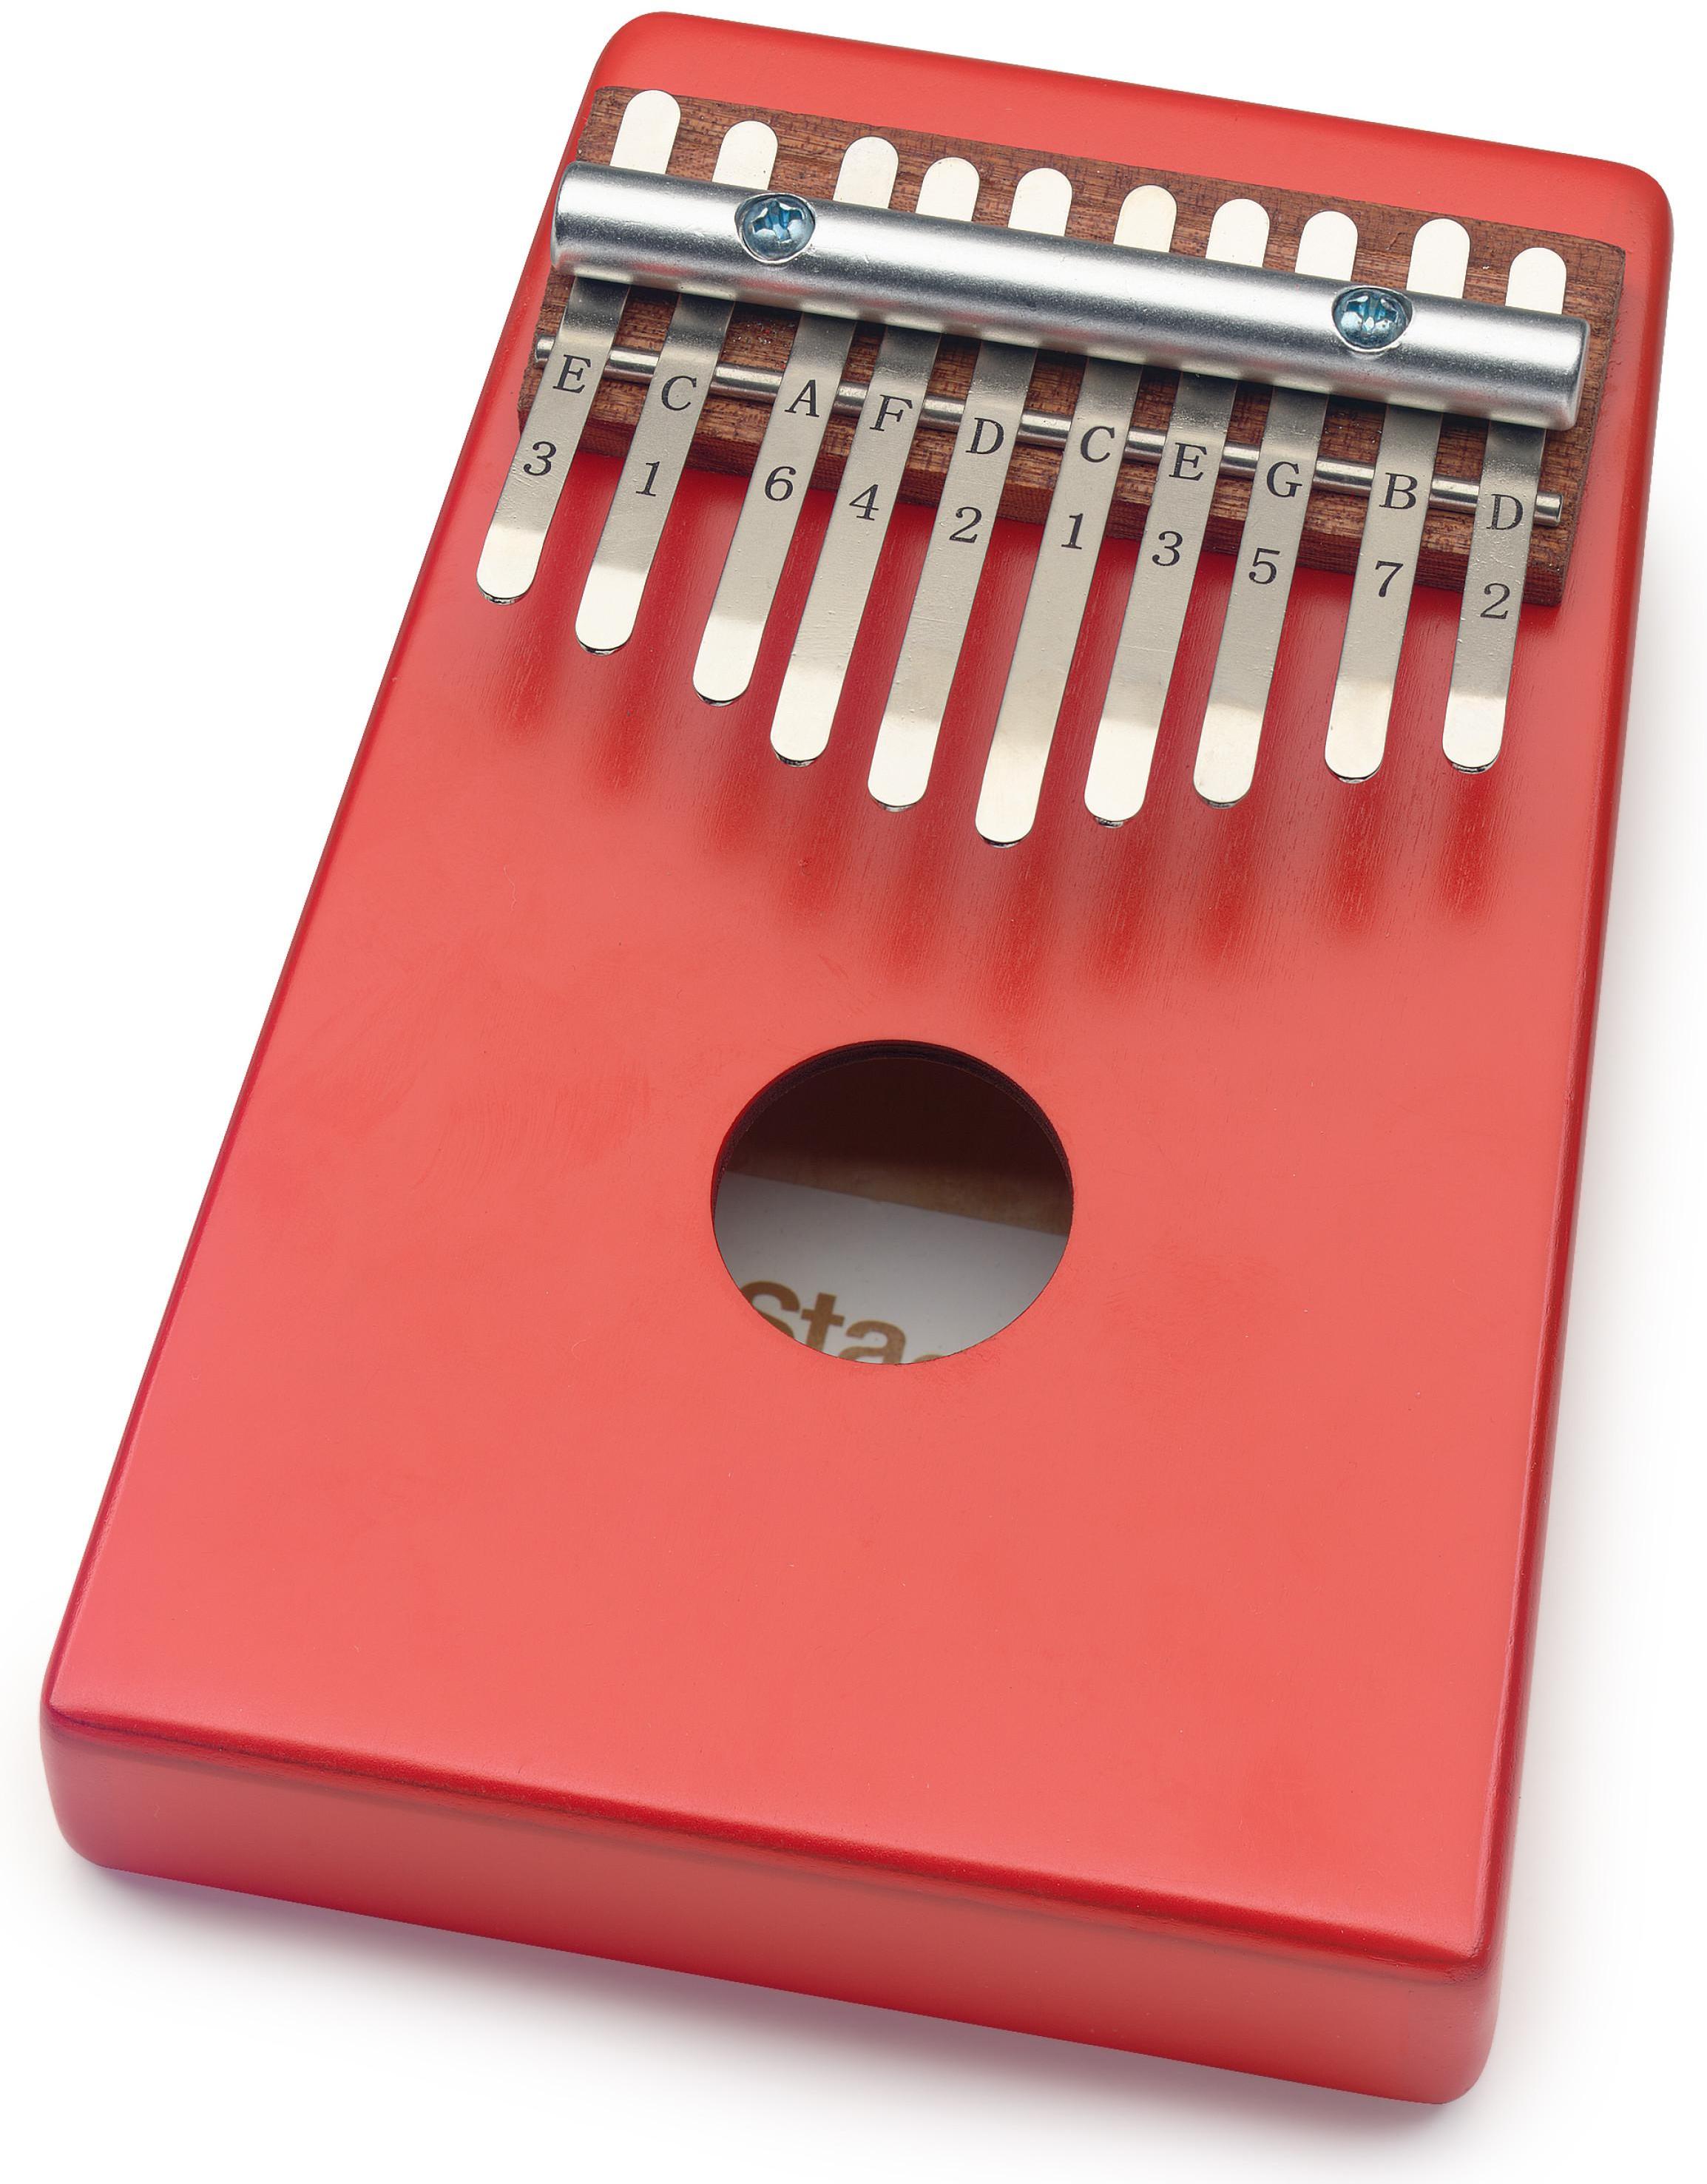 Percussions à frapper Stagg Kalimba enfant 10 notes Rouge